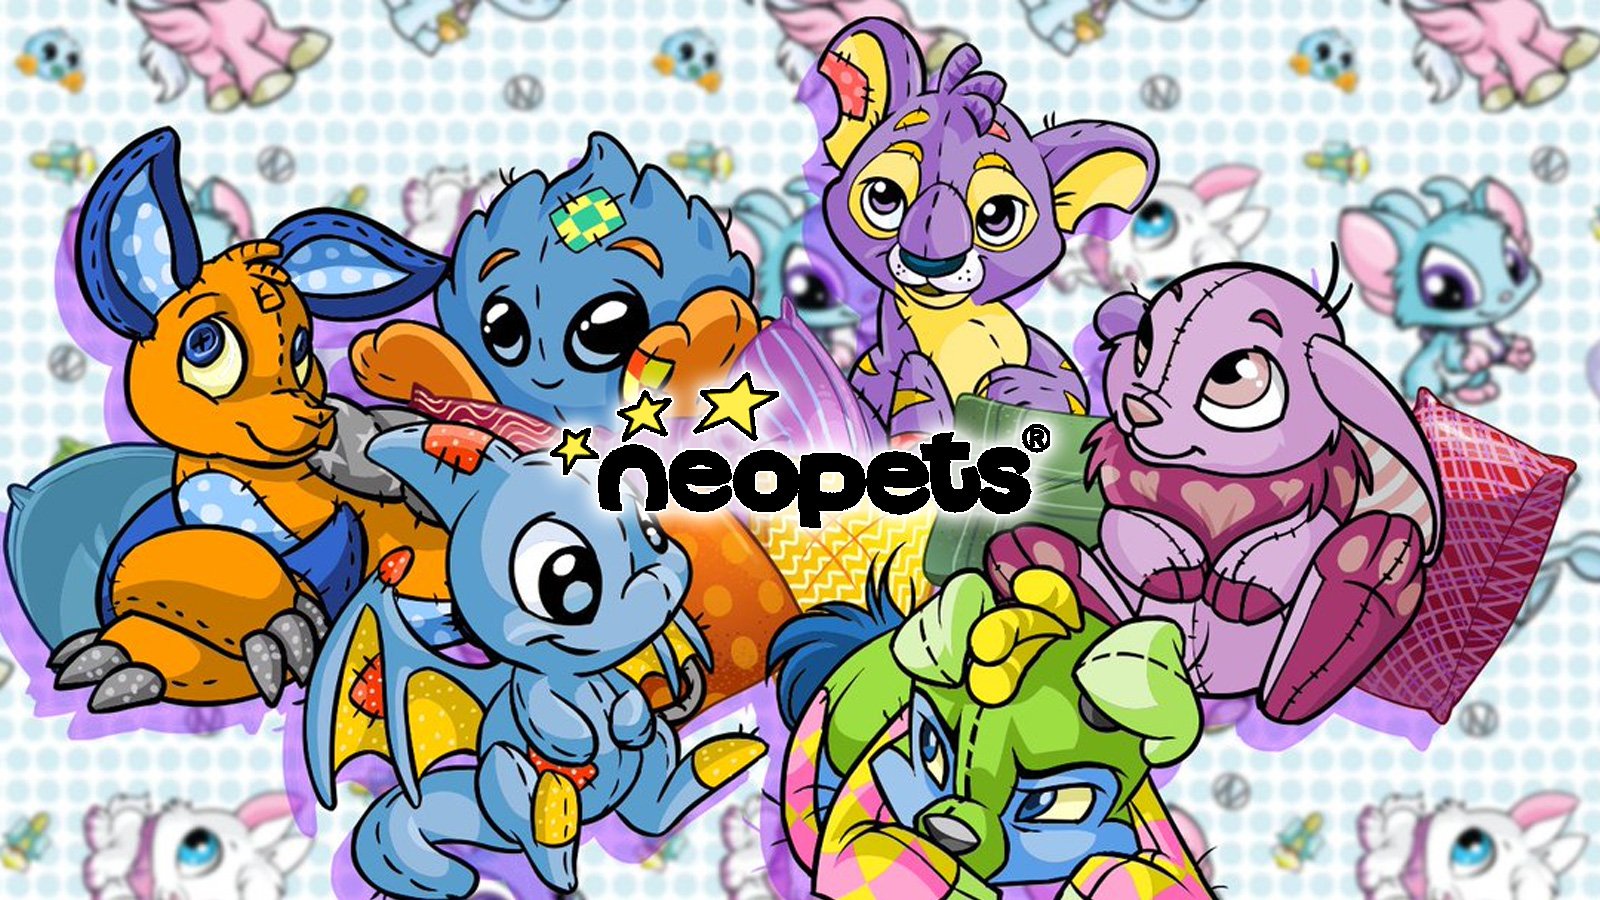 Neopets says hackers had access to its systems for 18 months